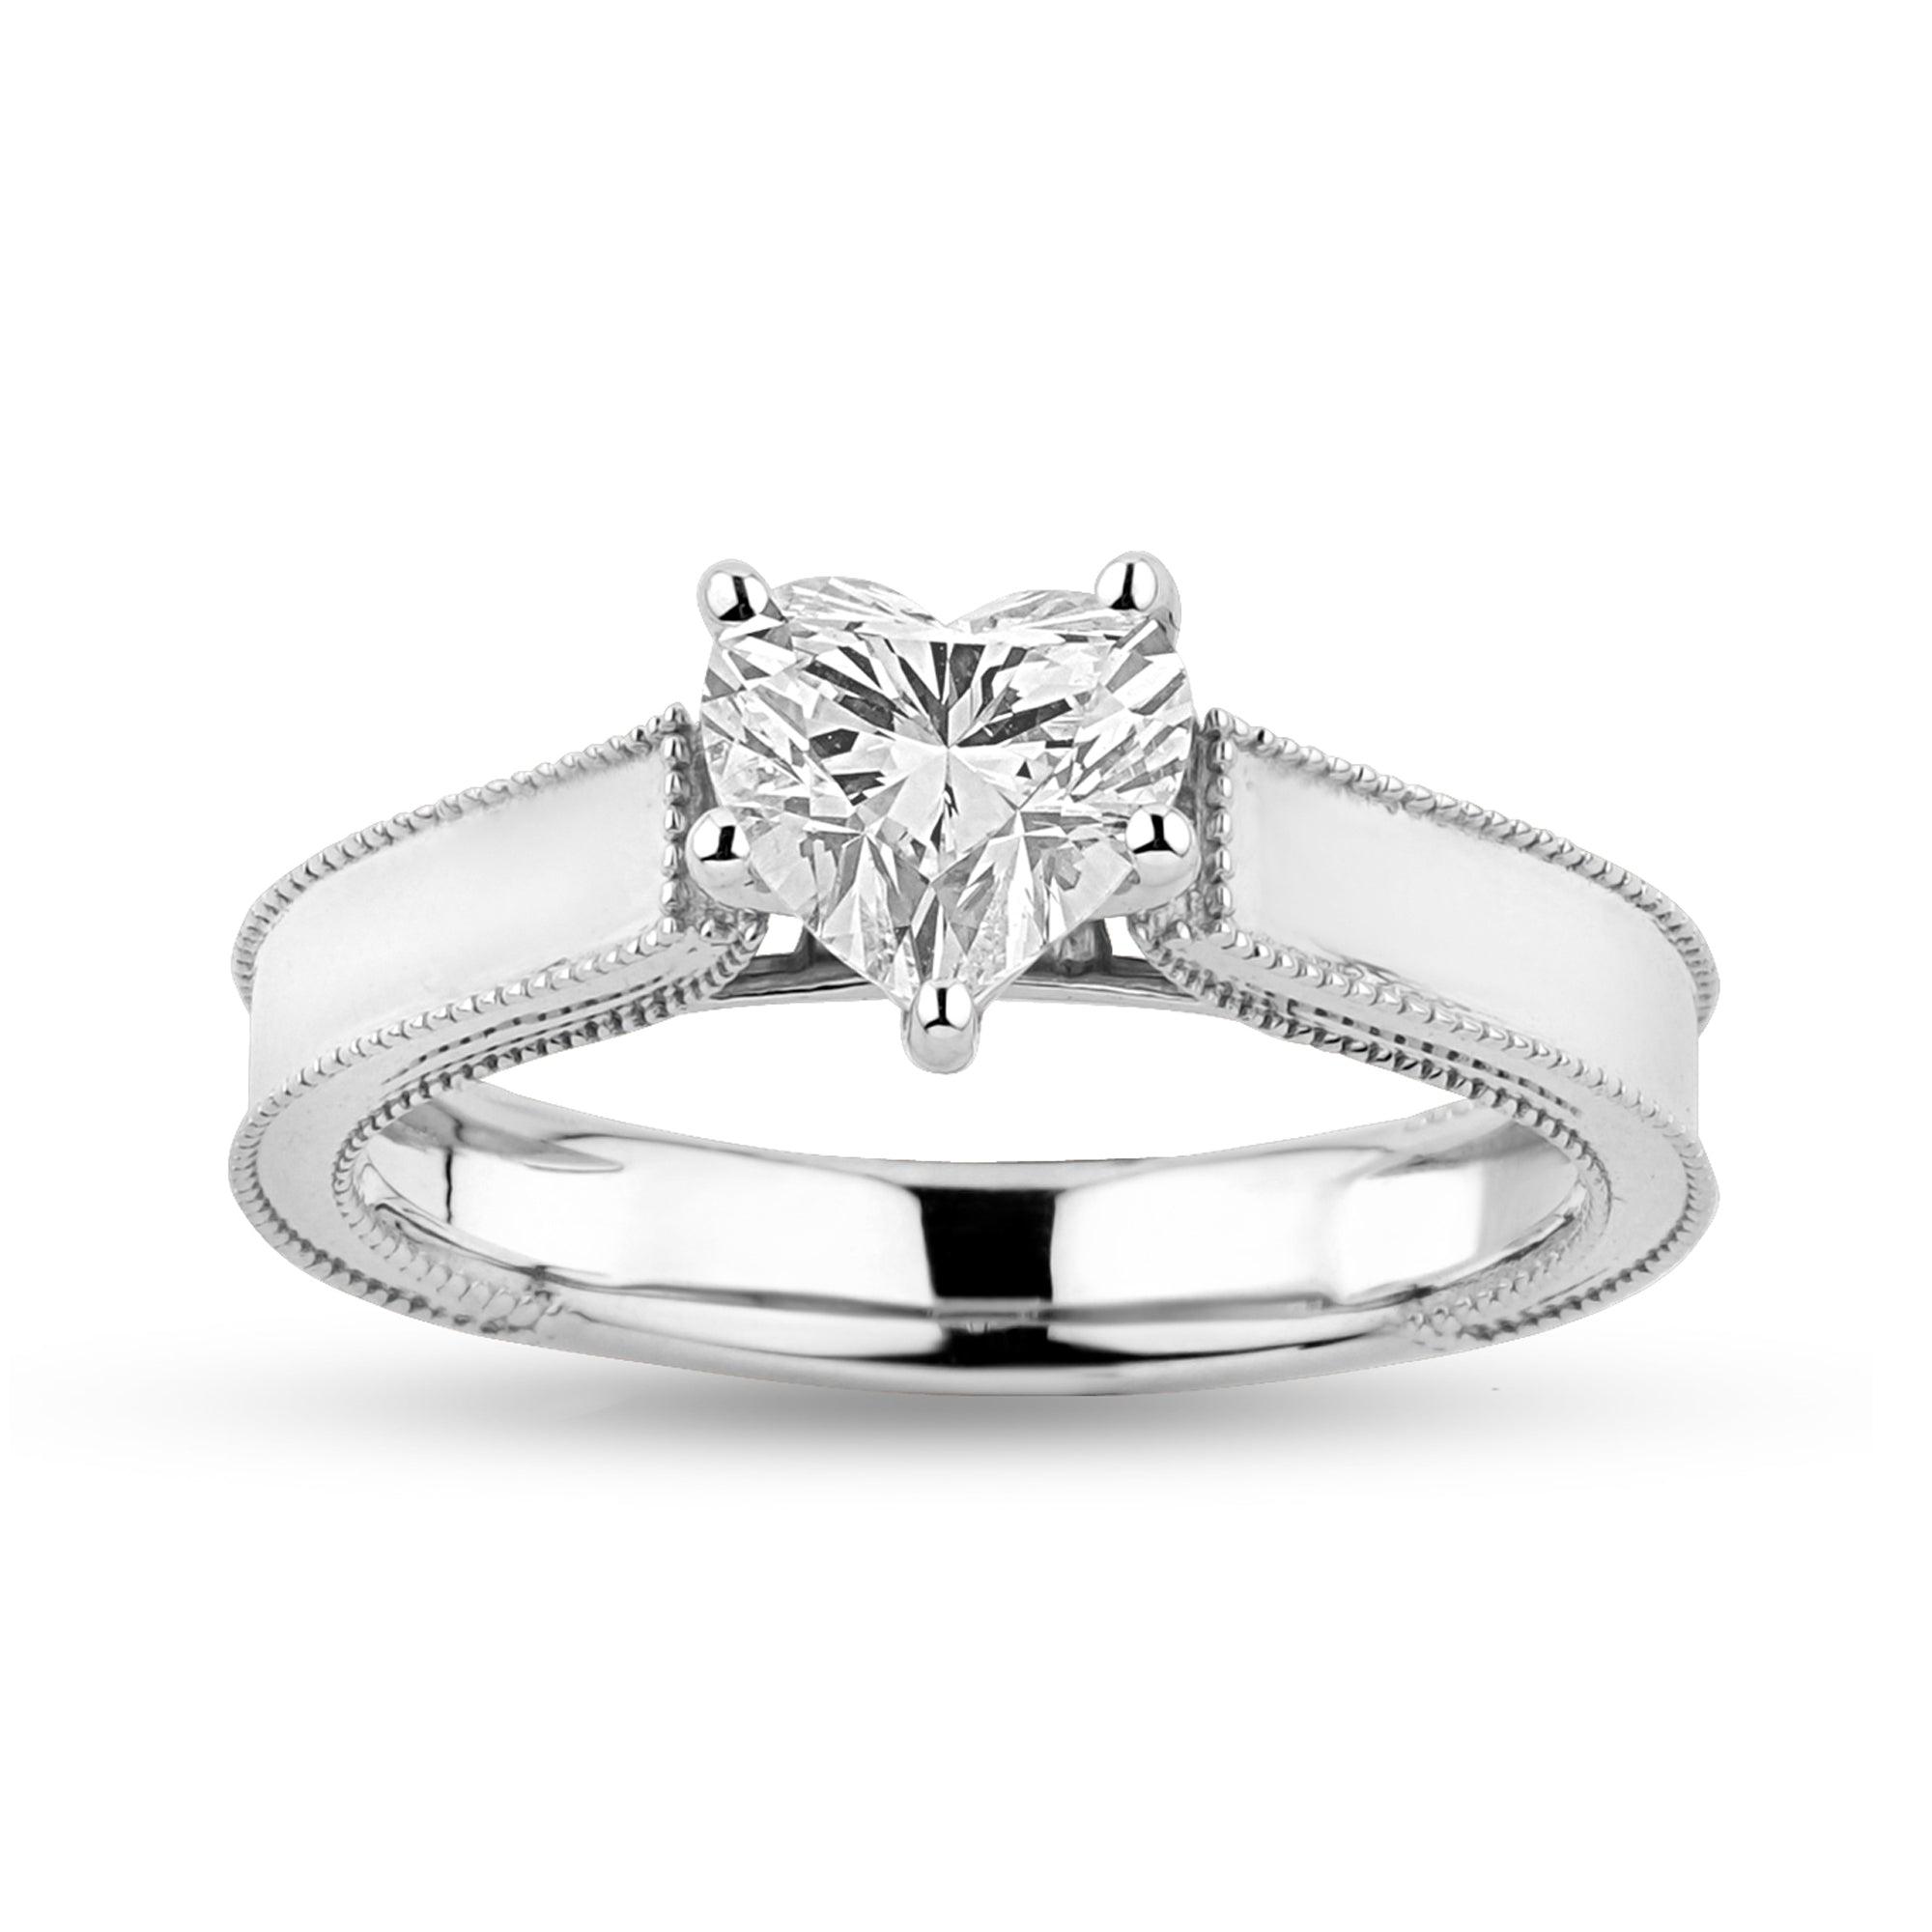 Moissanite Solitaire Ring with 1.3ct Heart Center Stone - Harmony Bound